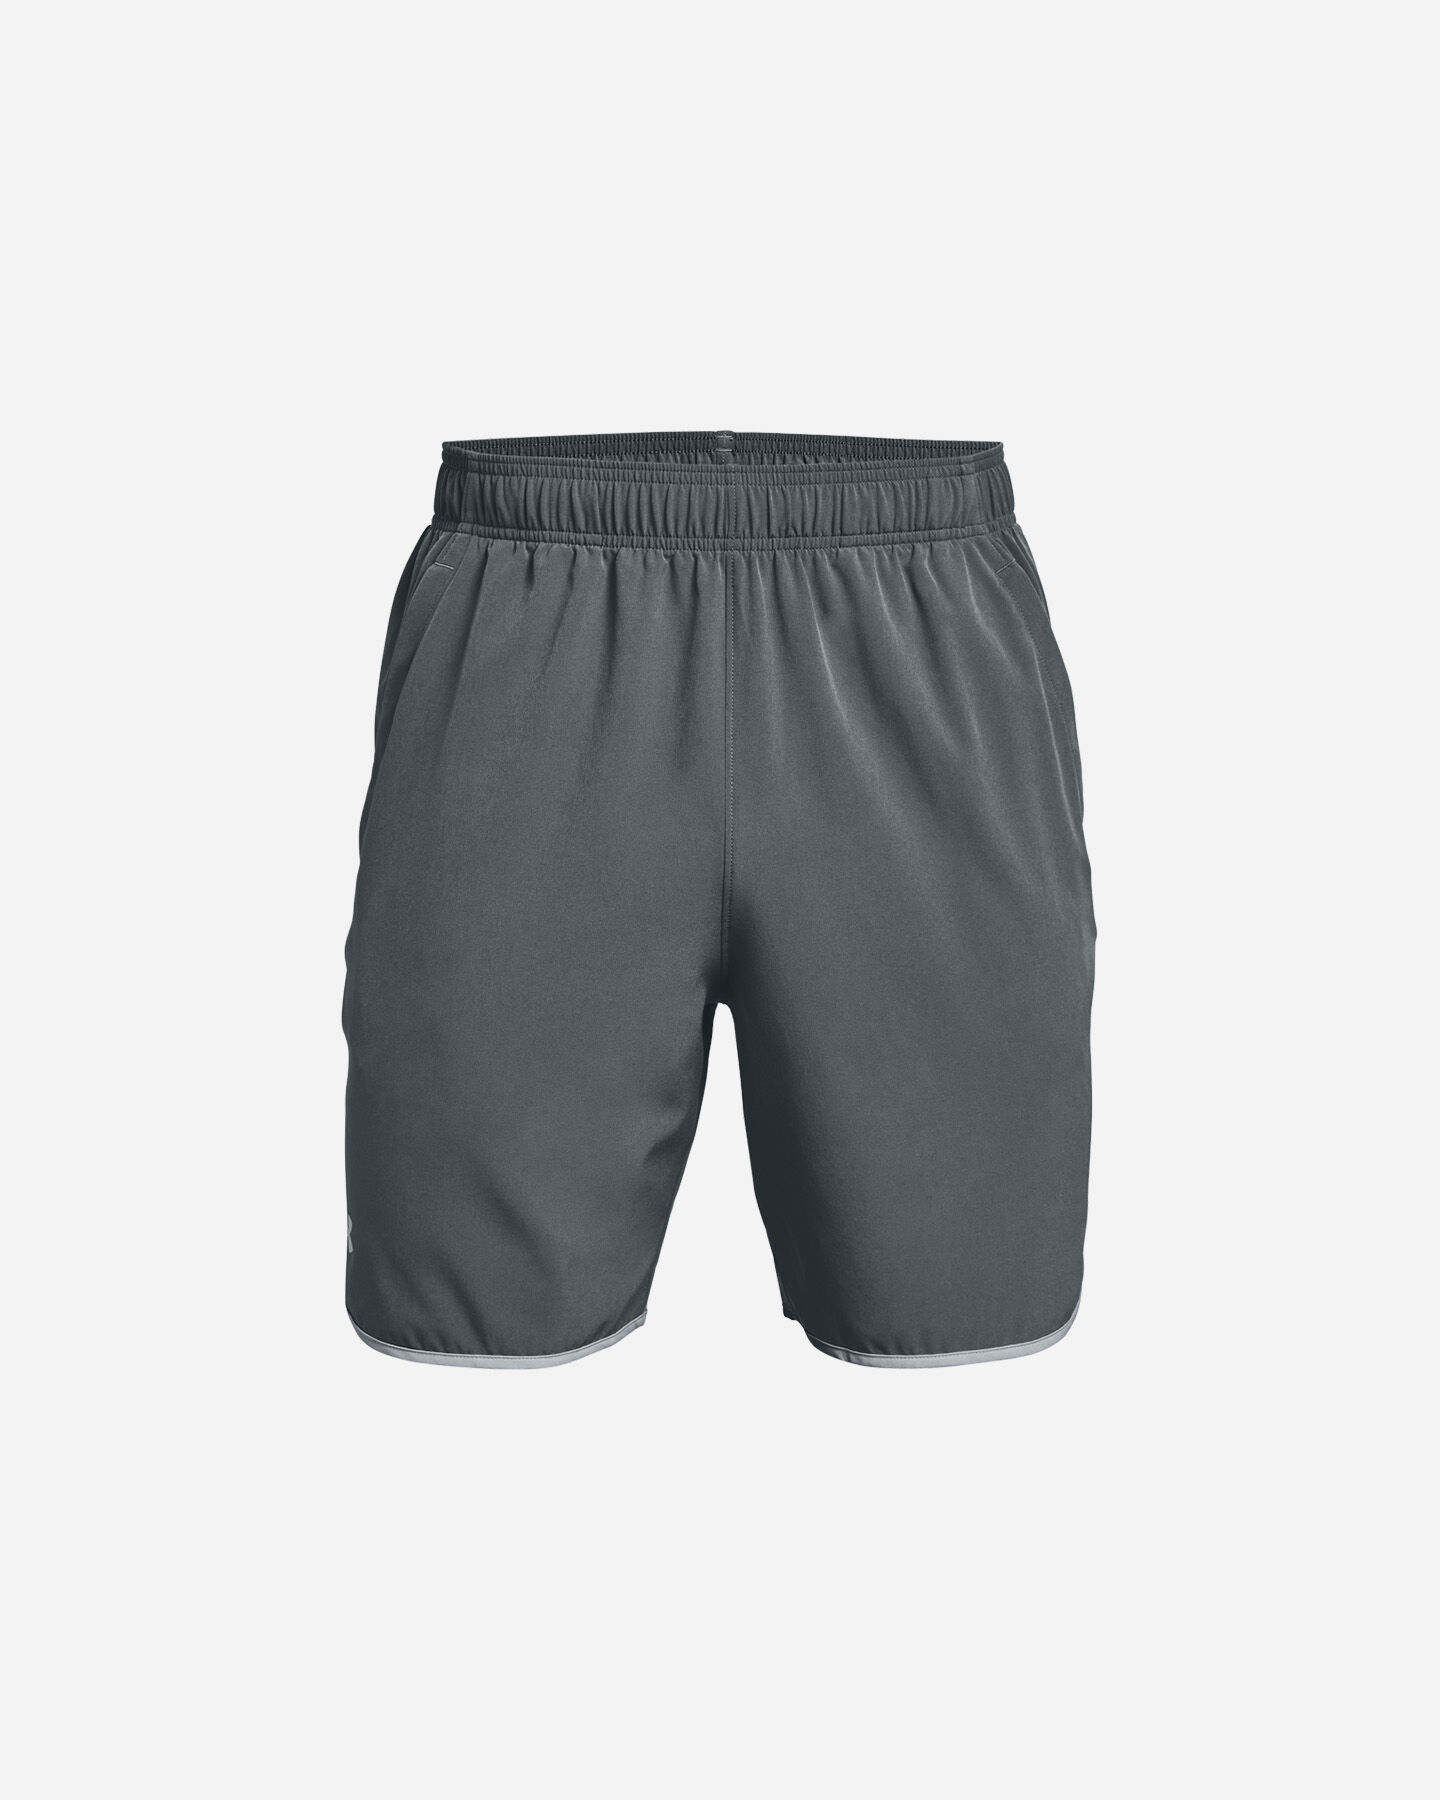  Pantalone training UNDER ARMOUR HIIT WOVEN M S5287183 scatto 0